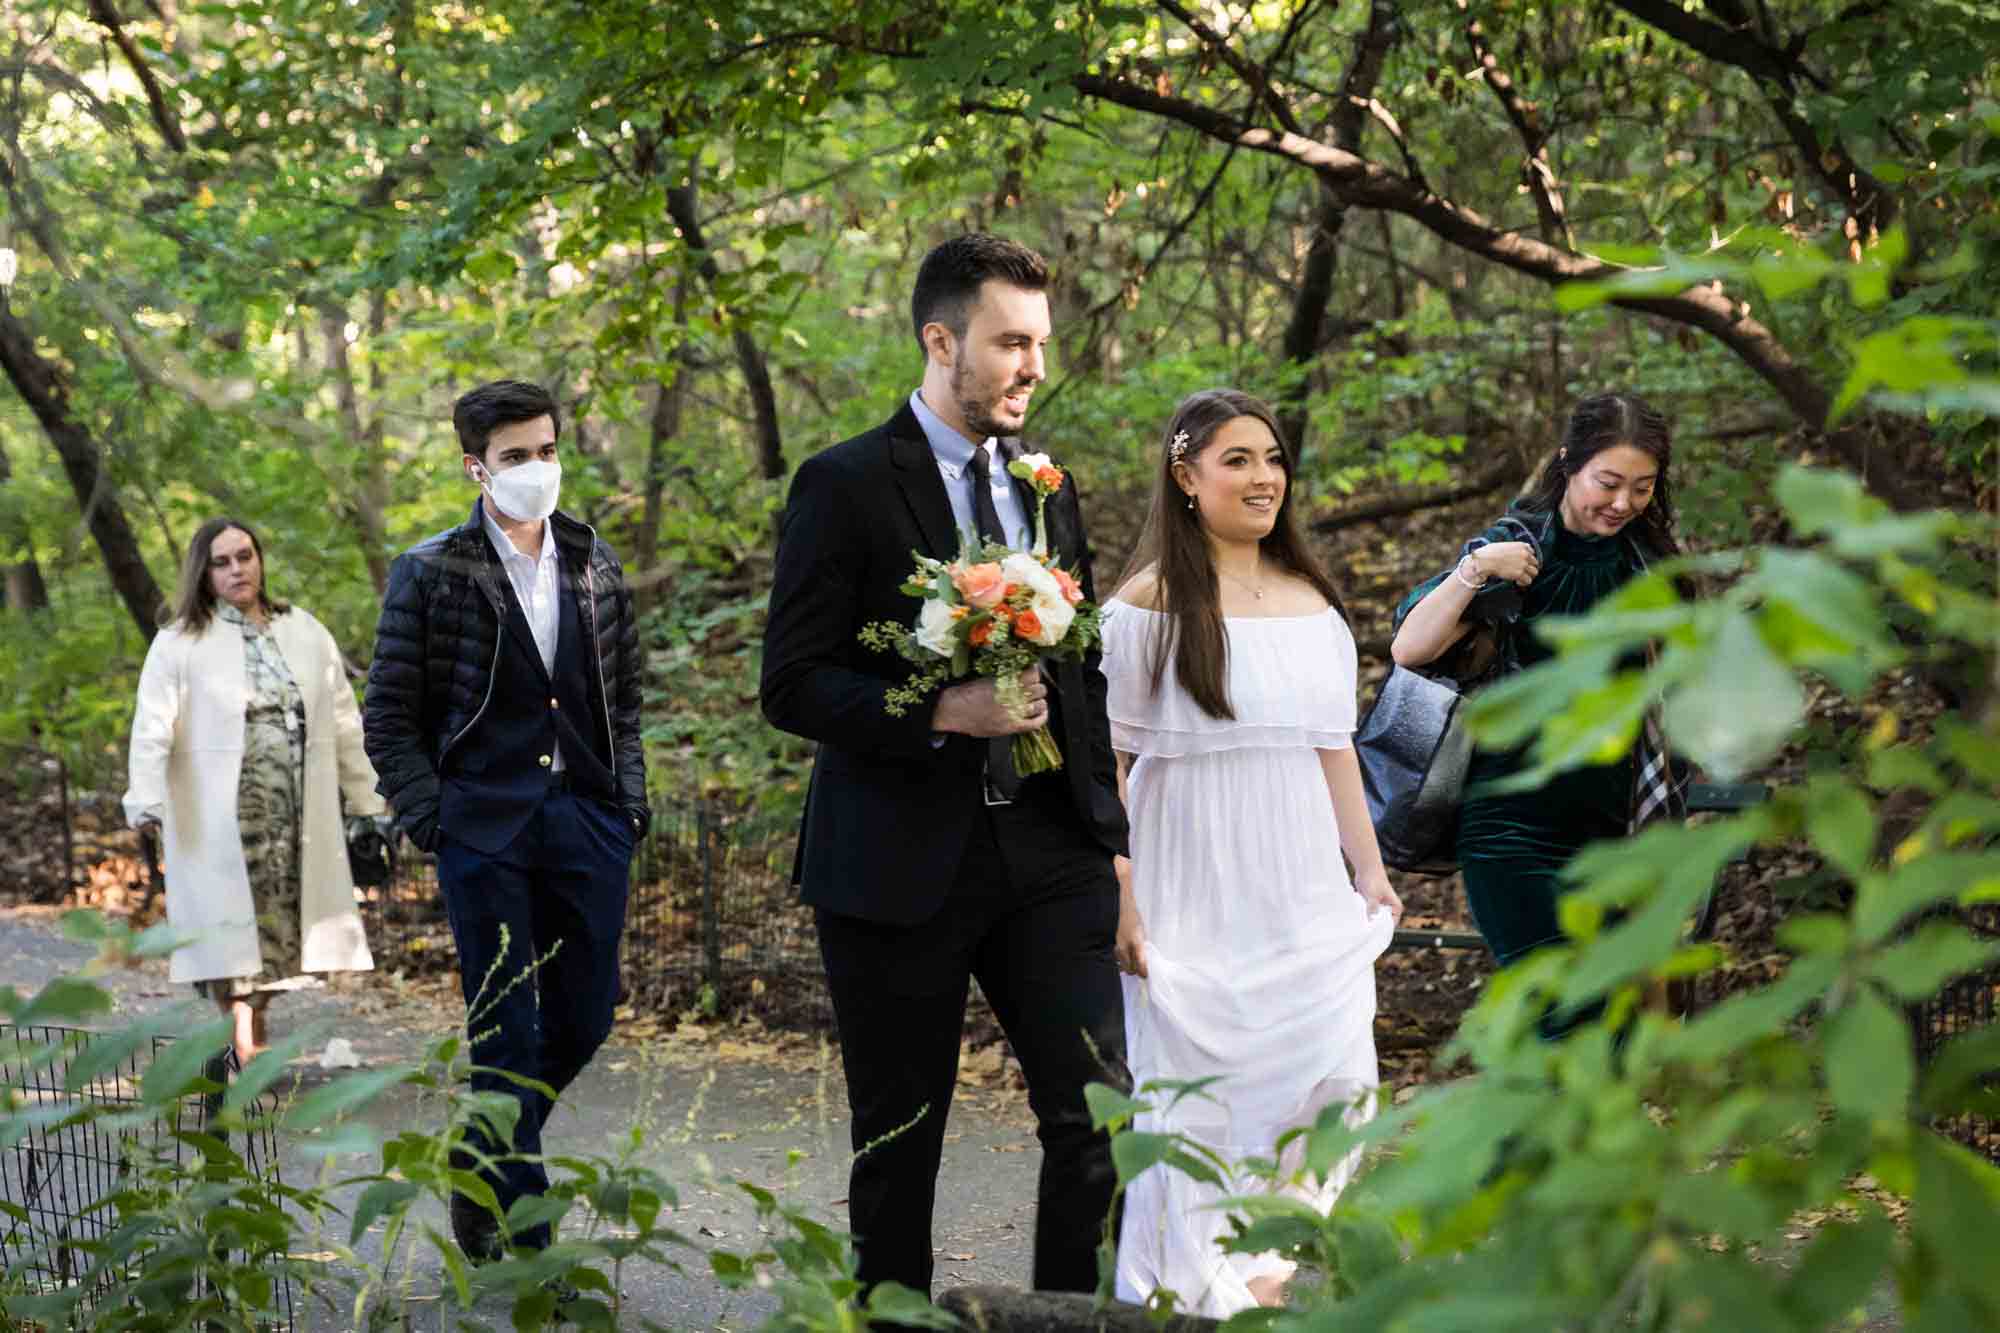 Group walking in forest with groom holding flower bouquet for article on how to elope in Central Park